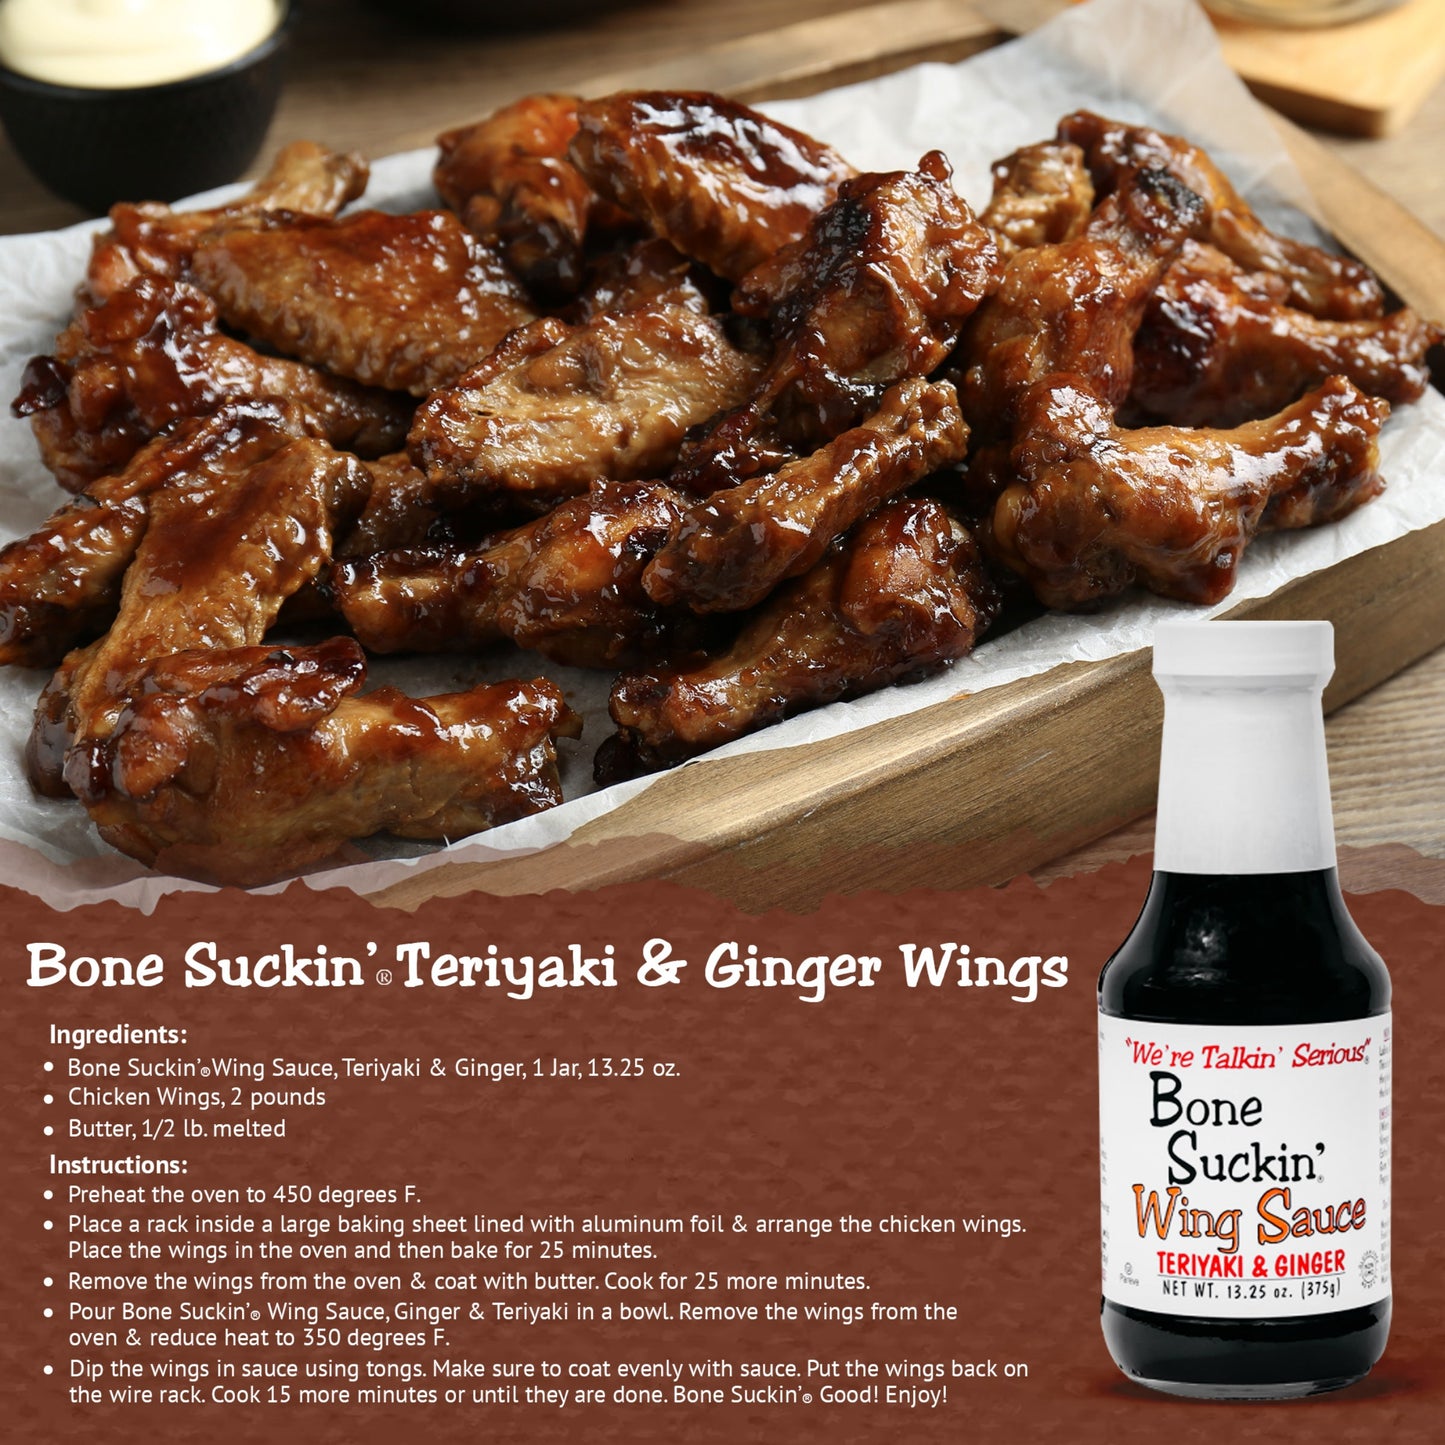 Bone Suckin' Teriyaki & Ginger Wings Recipe. Ingredients: 1 Jar Bone Suckin' Teriyaki & Ginger wing sauce, 2 pounds chicken wings, 1/2 lb butter melted. Instructions: Preheat oven to 450F. Place a rack inside a large baking sheet lined with foil. Arrange wings and bake for 25 minutes. Pour Bone Suckin' Wing Sauce in a bowl. Remove wings from oven and reduce heat to 350F. Dip wings in sauce using tongs. Make sure to coat evenly with sauce. Put wings back on the wire rack, cook 15 more minutes or until done.